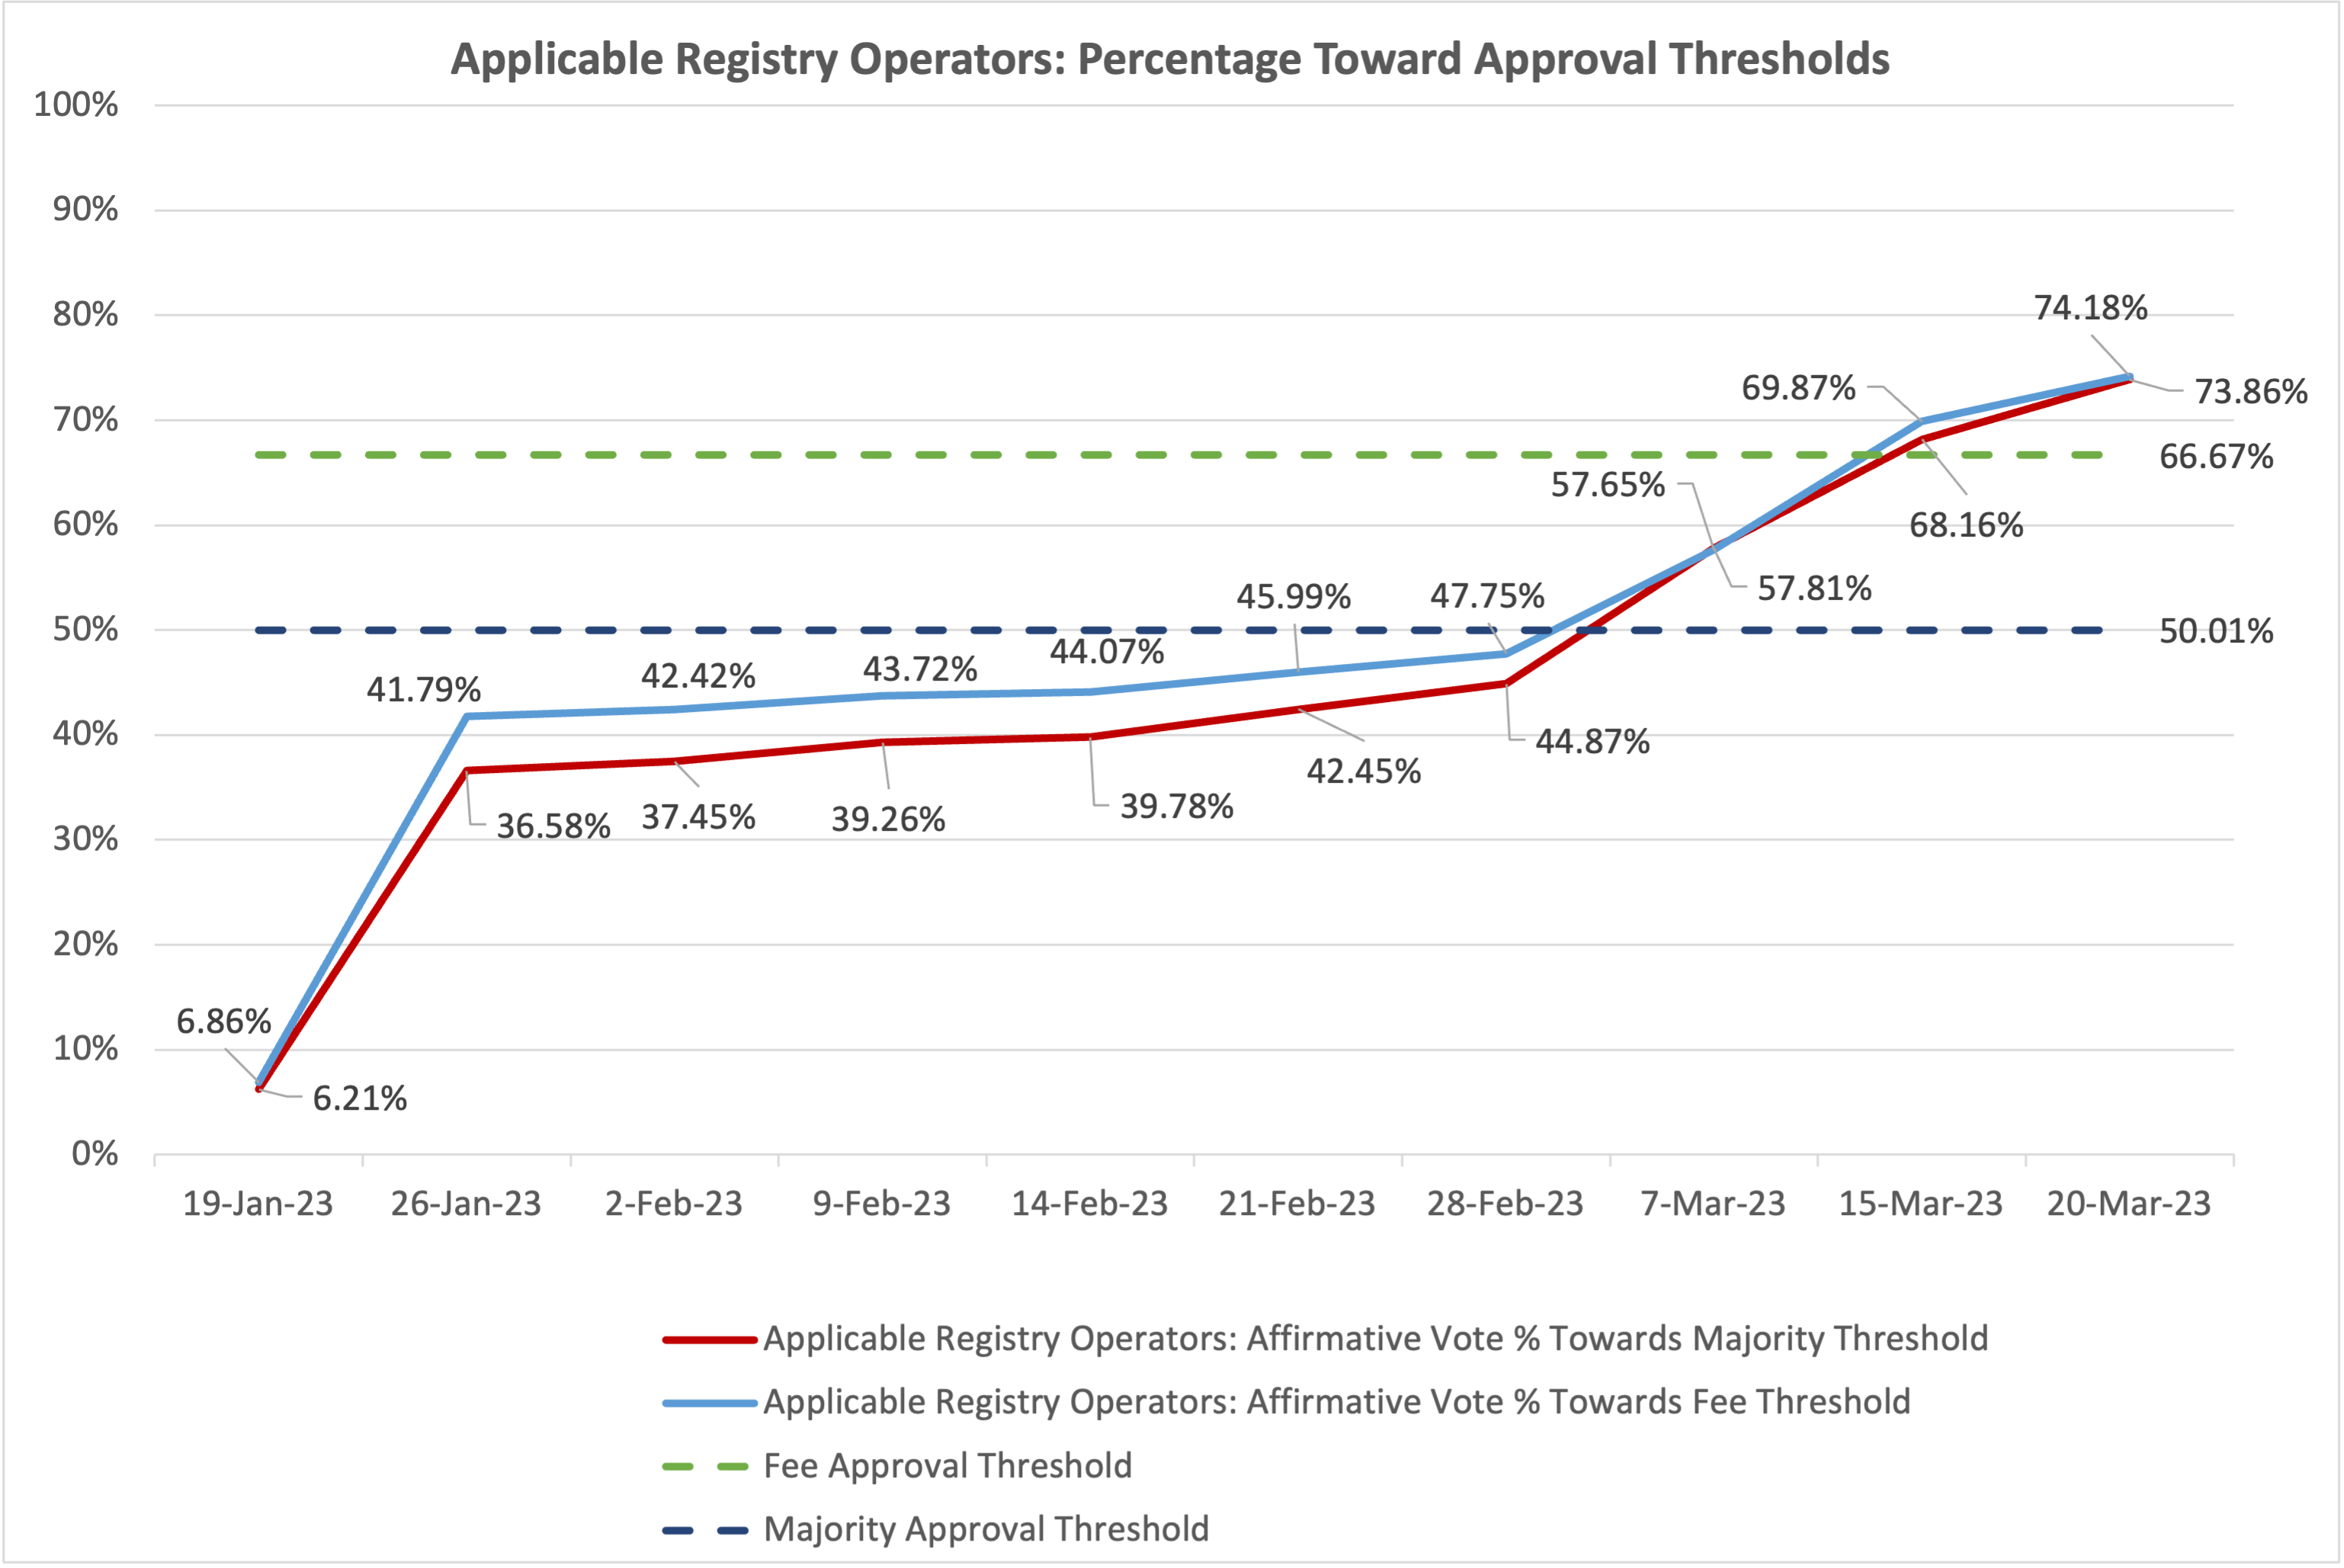 Line chart of the progress of the vote towards the affirmative approval of the fee and majority threshold for Applicable Registry Operators, where the fee threshold is 66.67% and the majority threshold is 50.01%. The data shows that as of the 20th of March 2023, the affirmative vote towards the fee approval threshold is at 74.18% and the affirmative vote towards the majority approval threshold is at 73.86%.